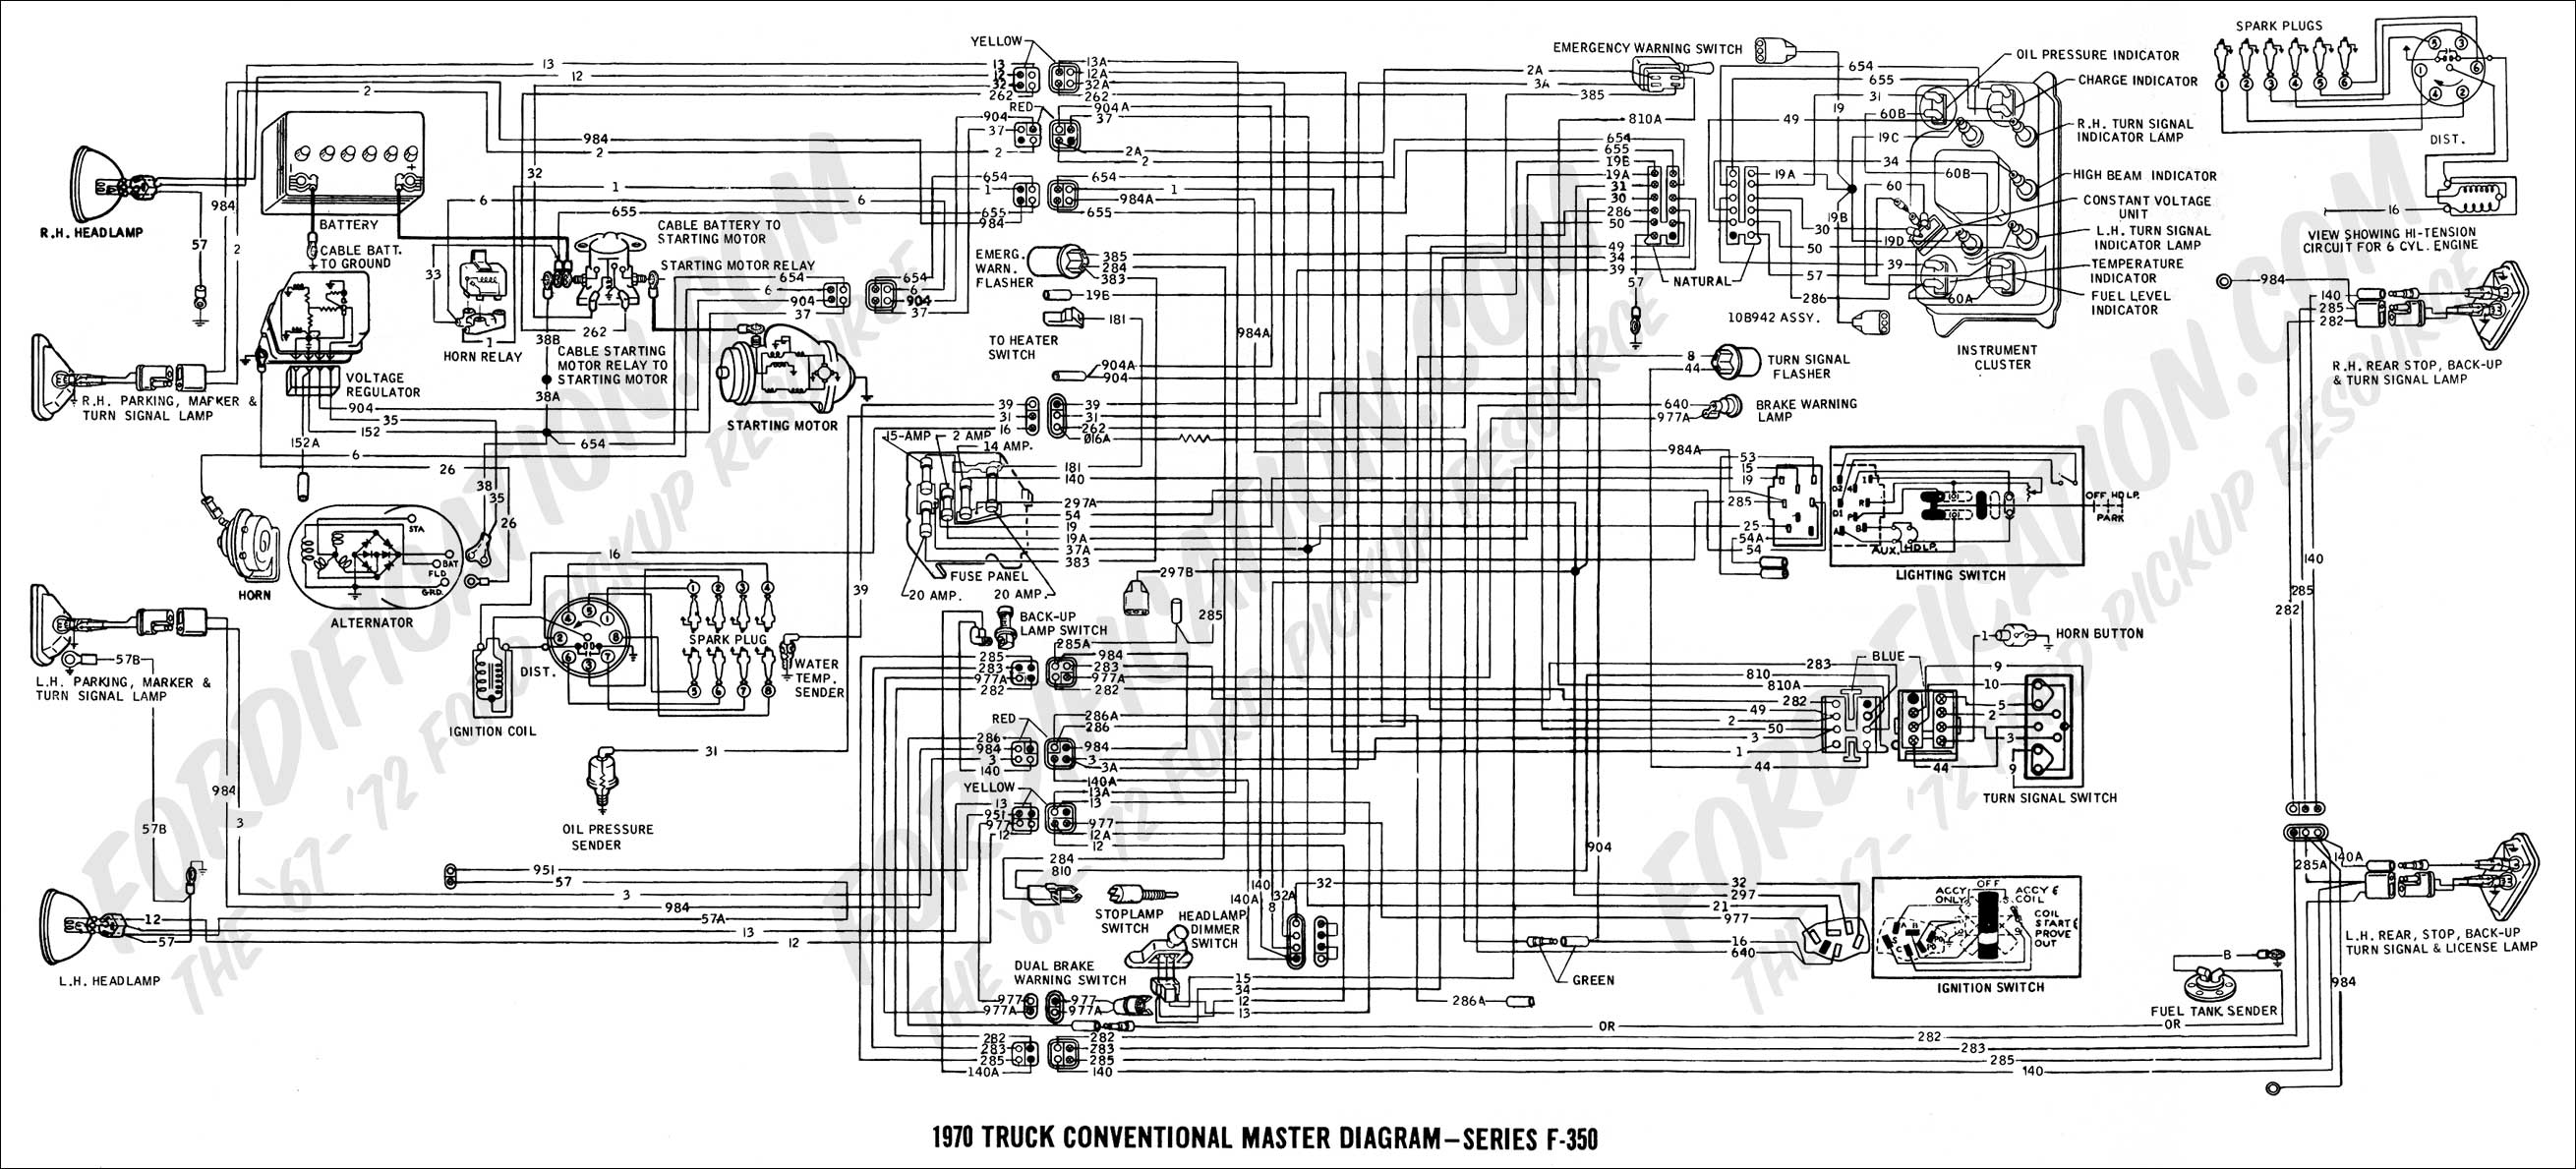 Ford Truck Technical Drawings and Schematics - Section H - Wiring Diagrams  1999 Ford F250 Wiring Diagrams    FORDification.com